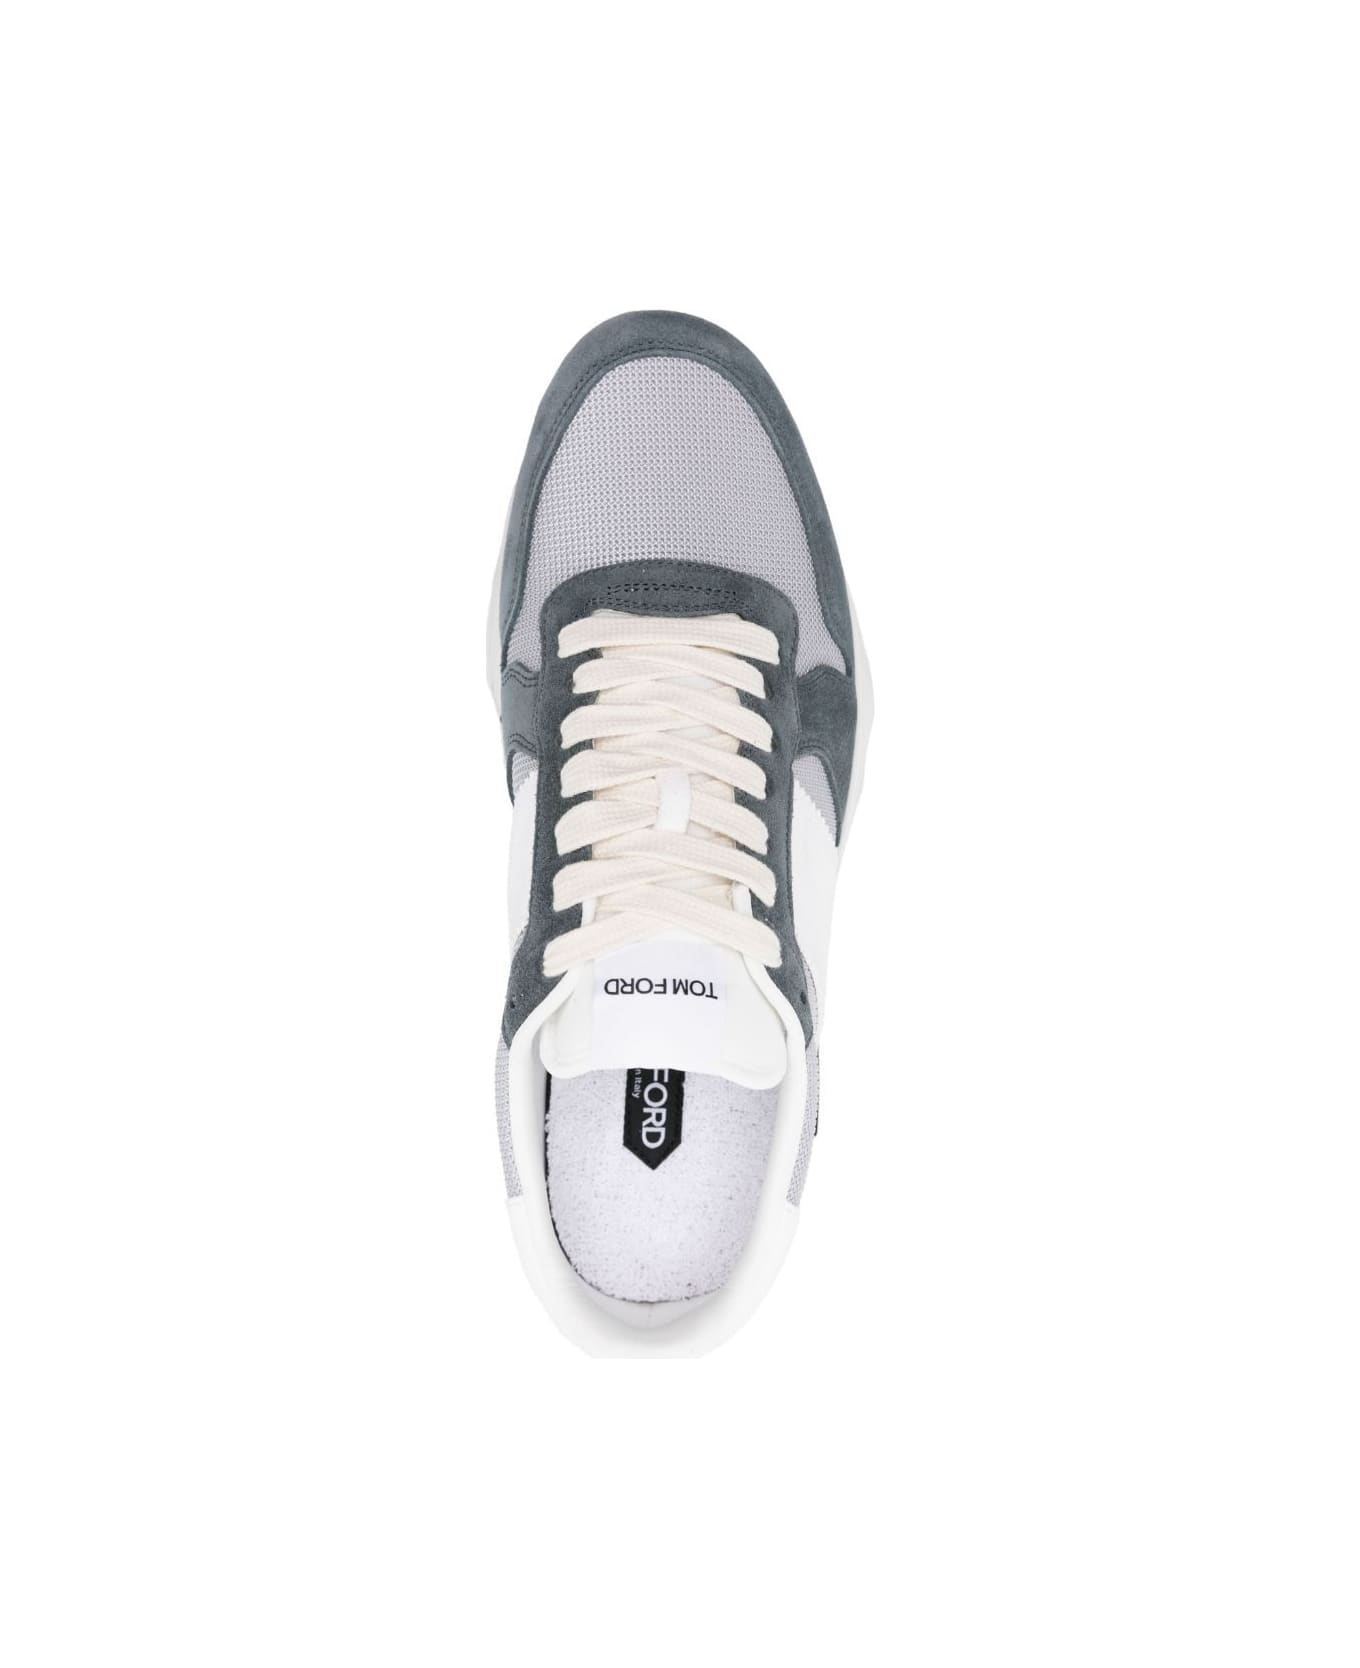 Tom Ford Low Top Sneakers - Silver Petrol Blue White